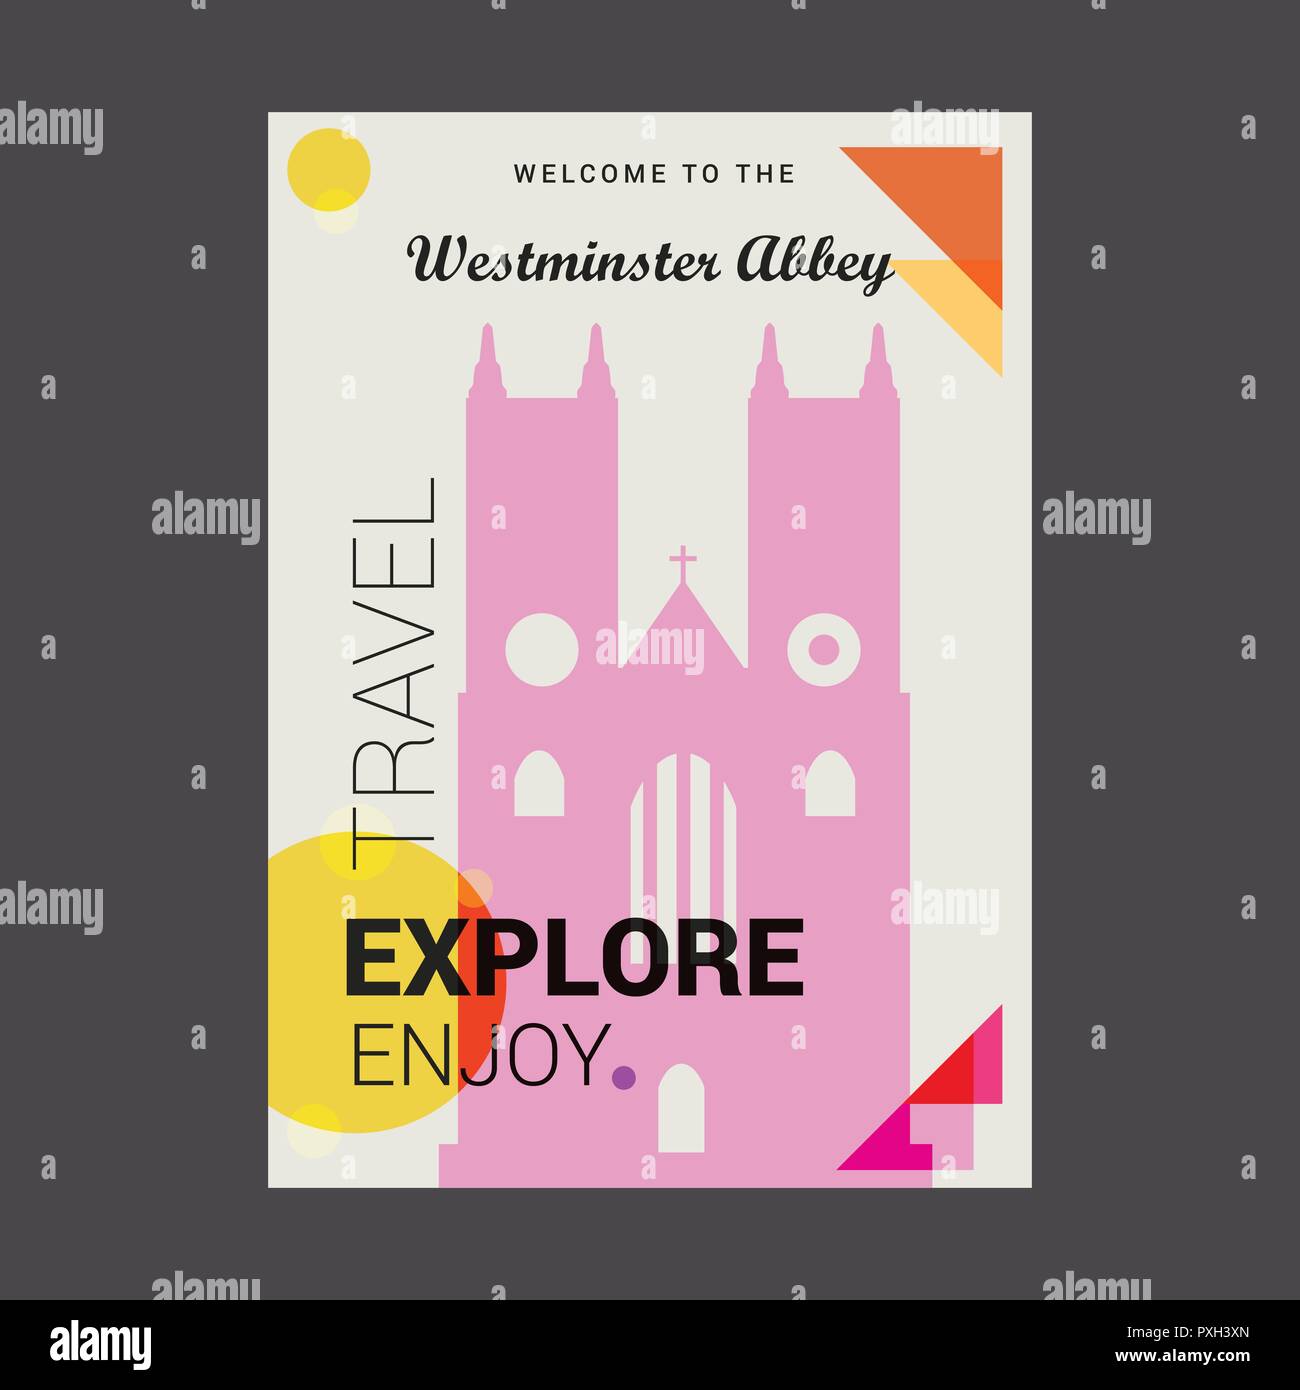 Welcome to The Westminster Abbey London , UK Explore, Travel Enjoy Poster Template Stock Vector